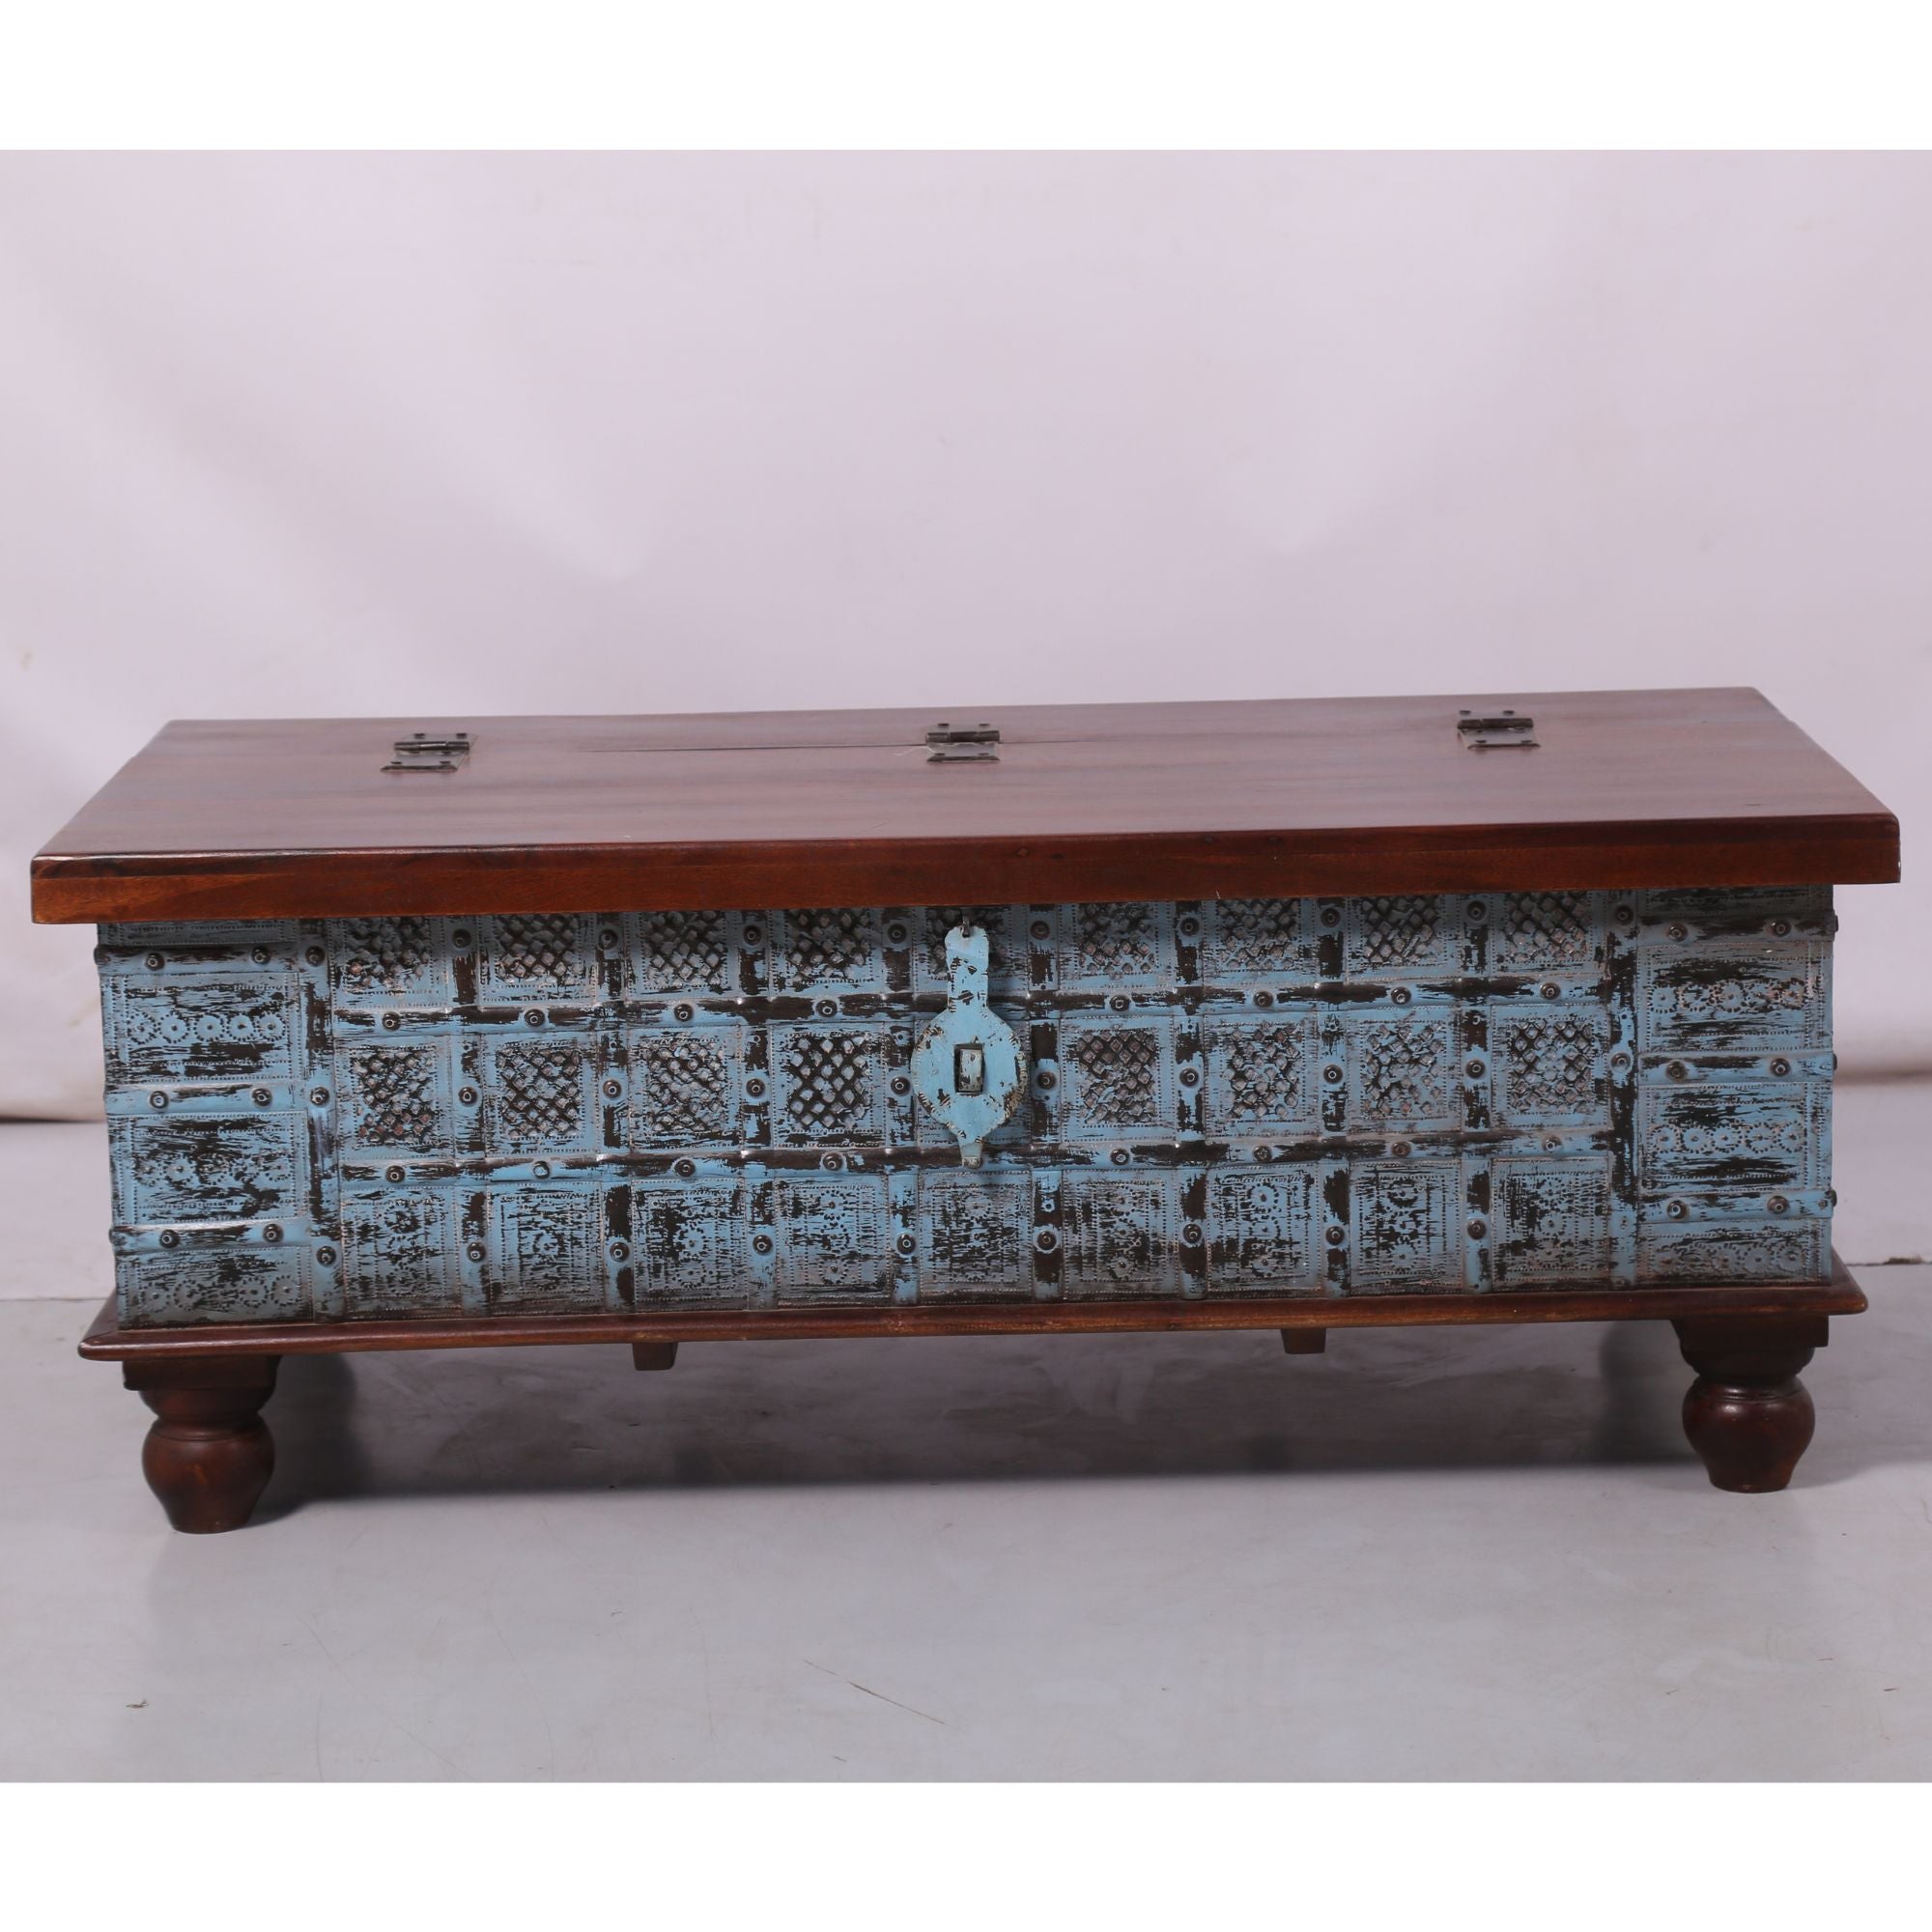 Coffee Table Antique Handcrafted Solid Mango Wood Storage Chest Box